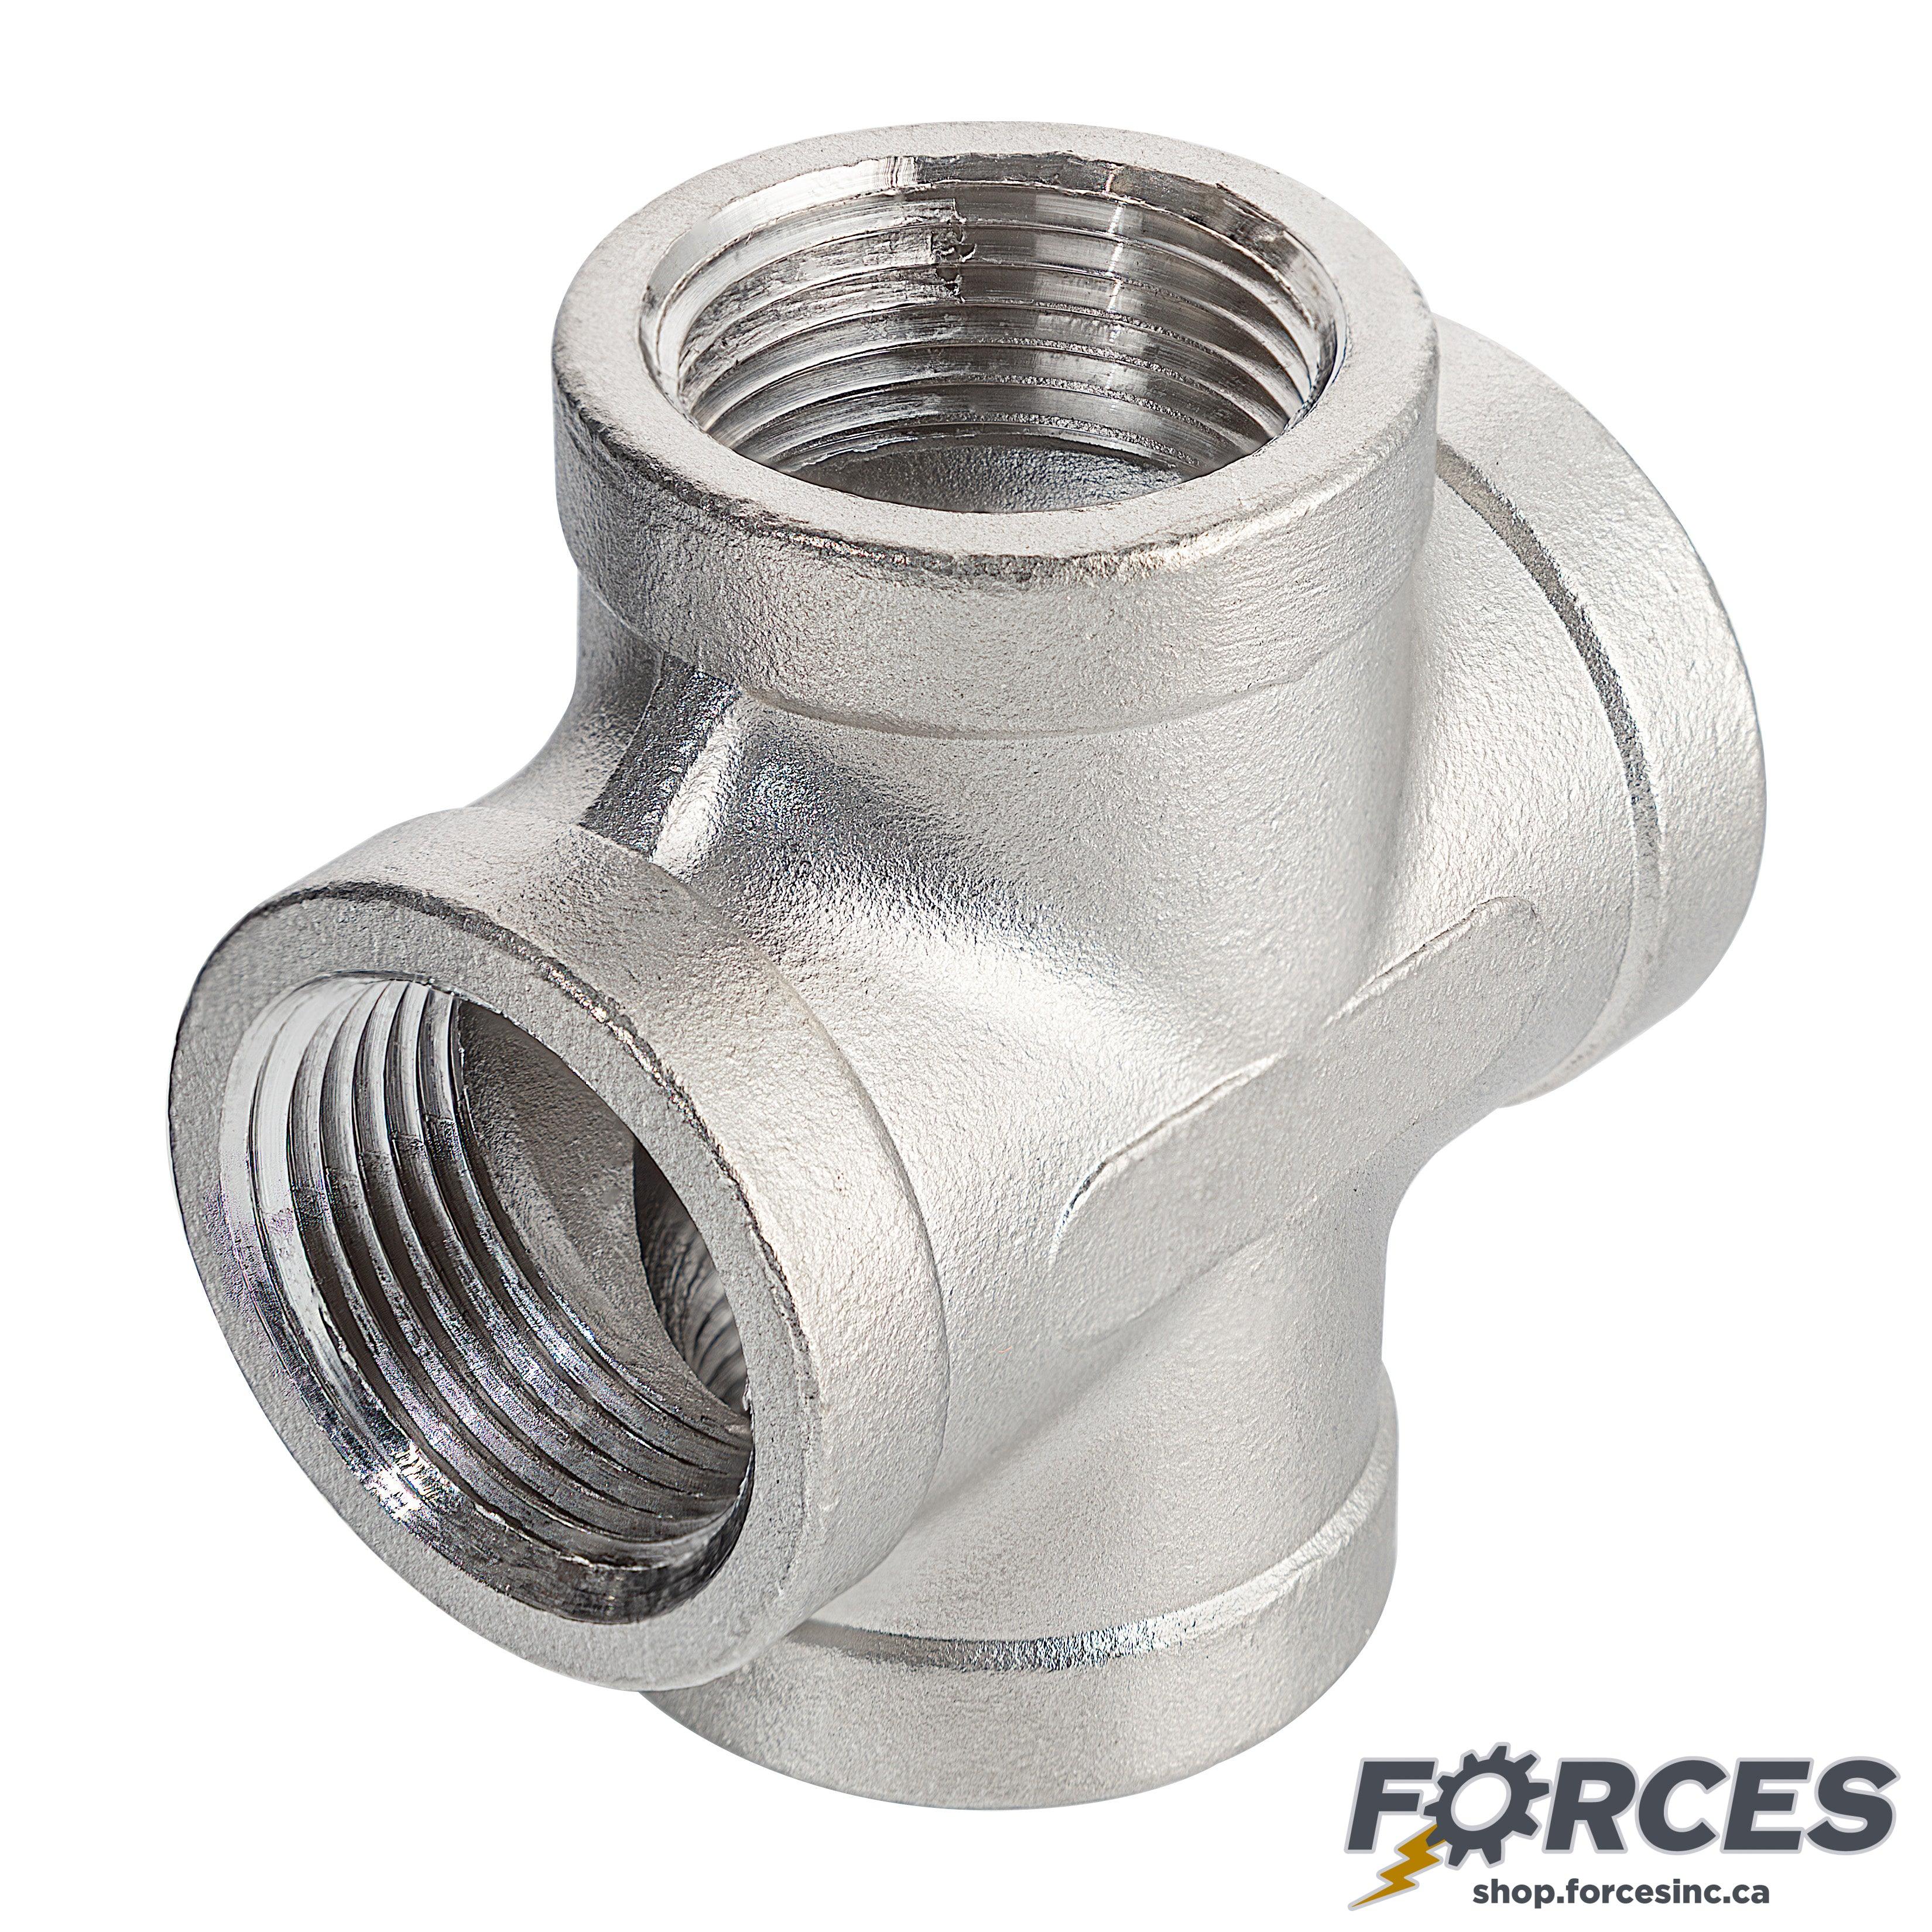 3/4" Cross NPT #150 - Stainless Steel 316 - Forces Inc